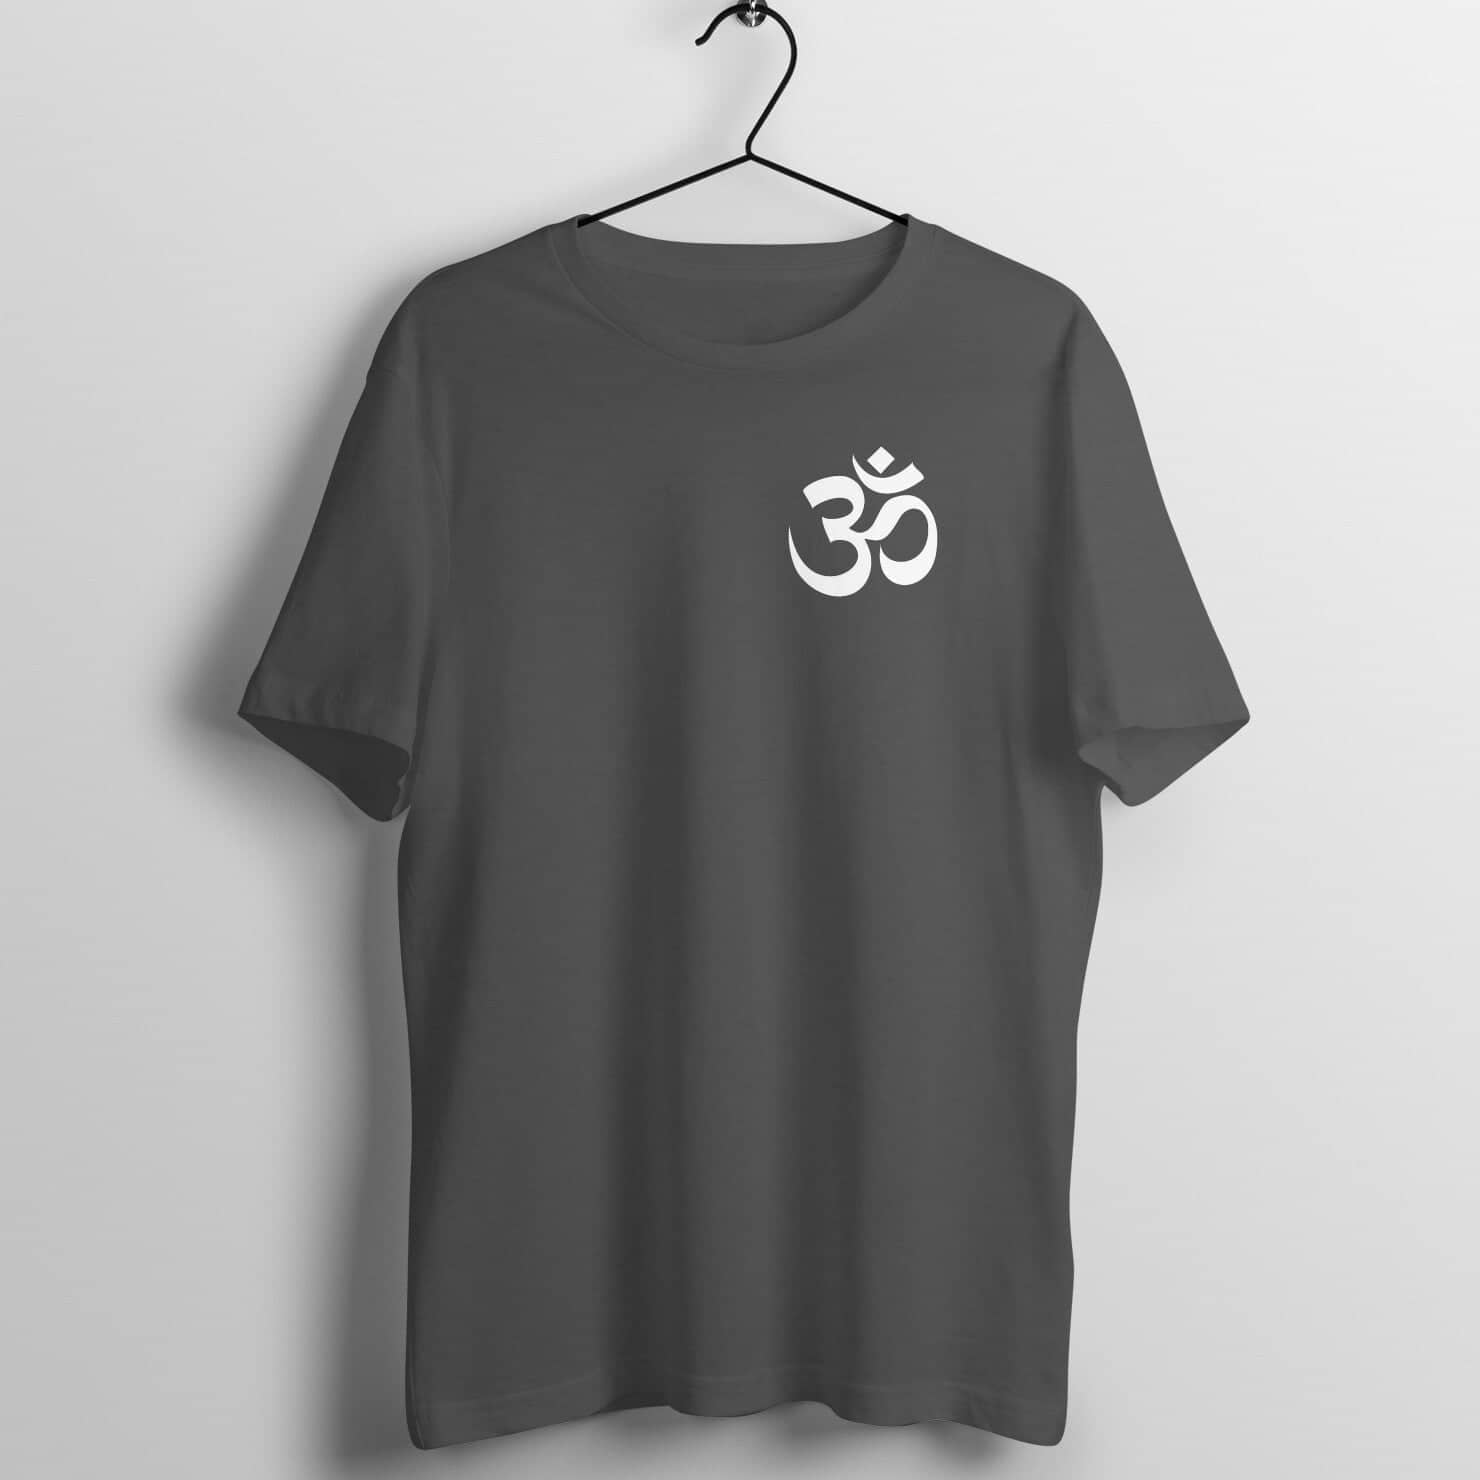 Aum Pocket Special Spiritual T Shirt for Men and Women freeshipping - Catch My Drift India